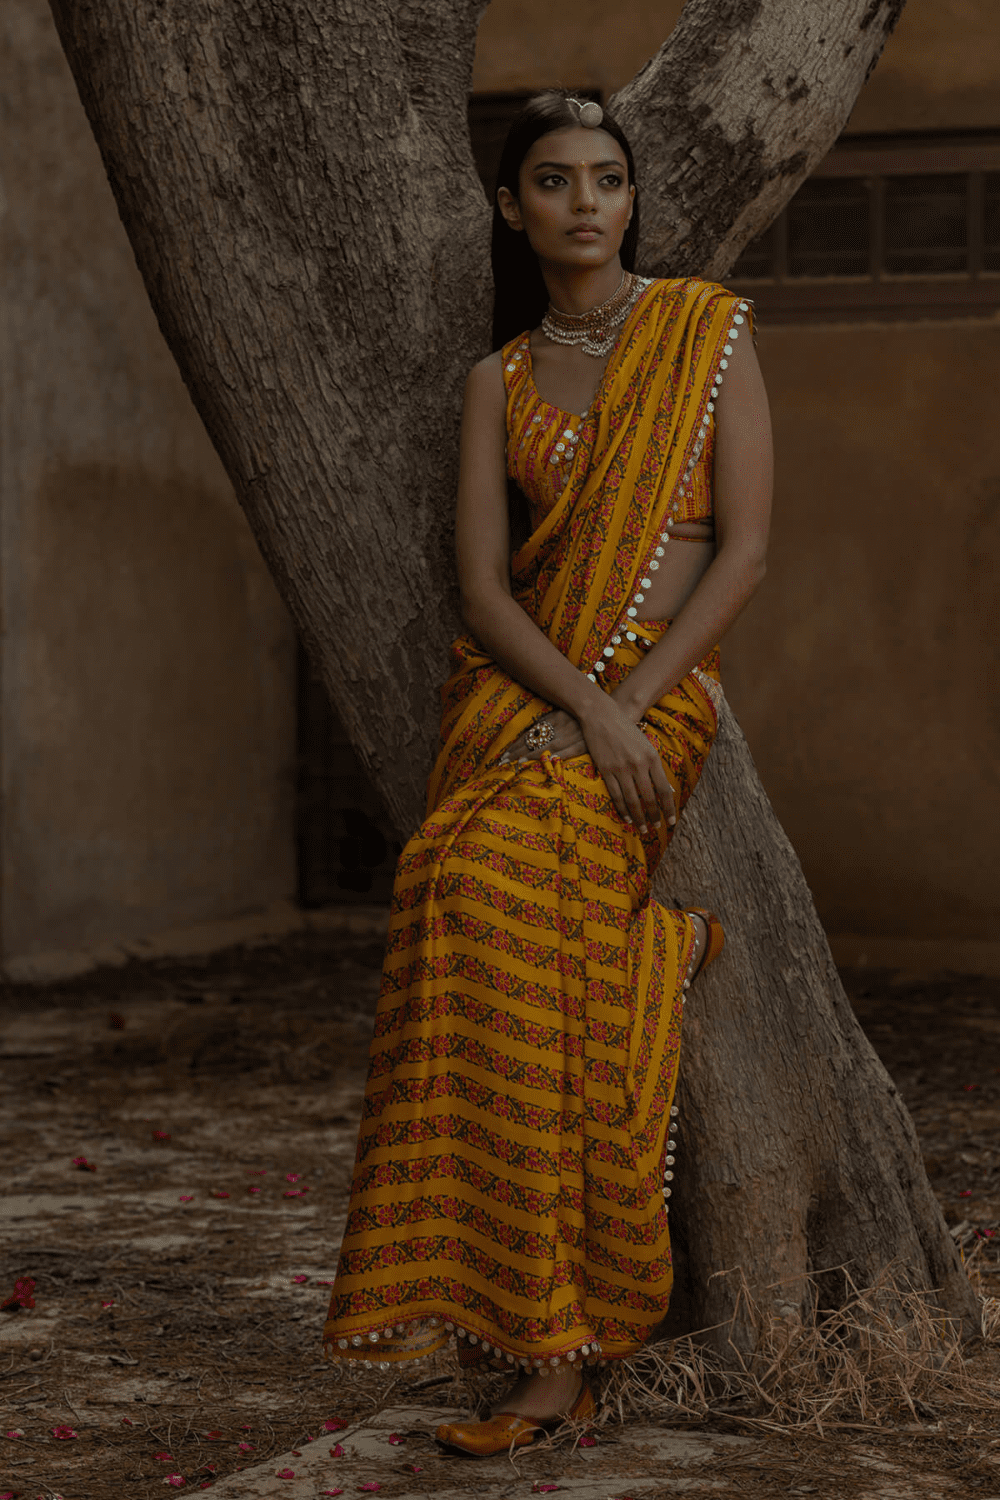 100+ Saree Pictures [HD] | Download Free Images on Unsplash